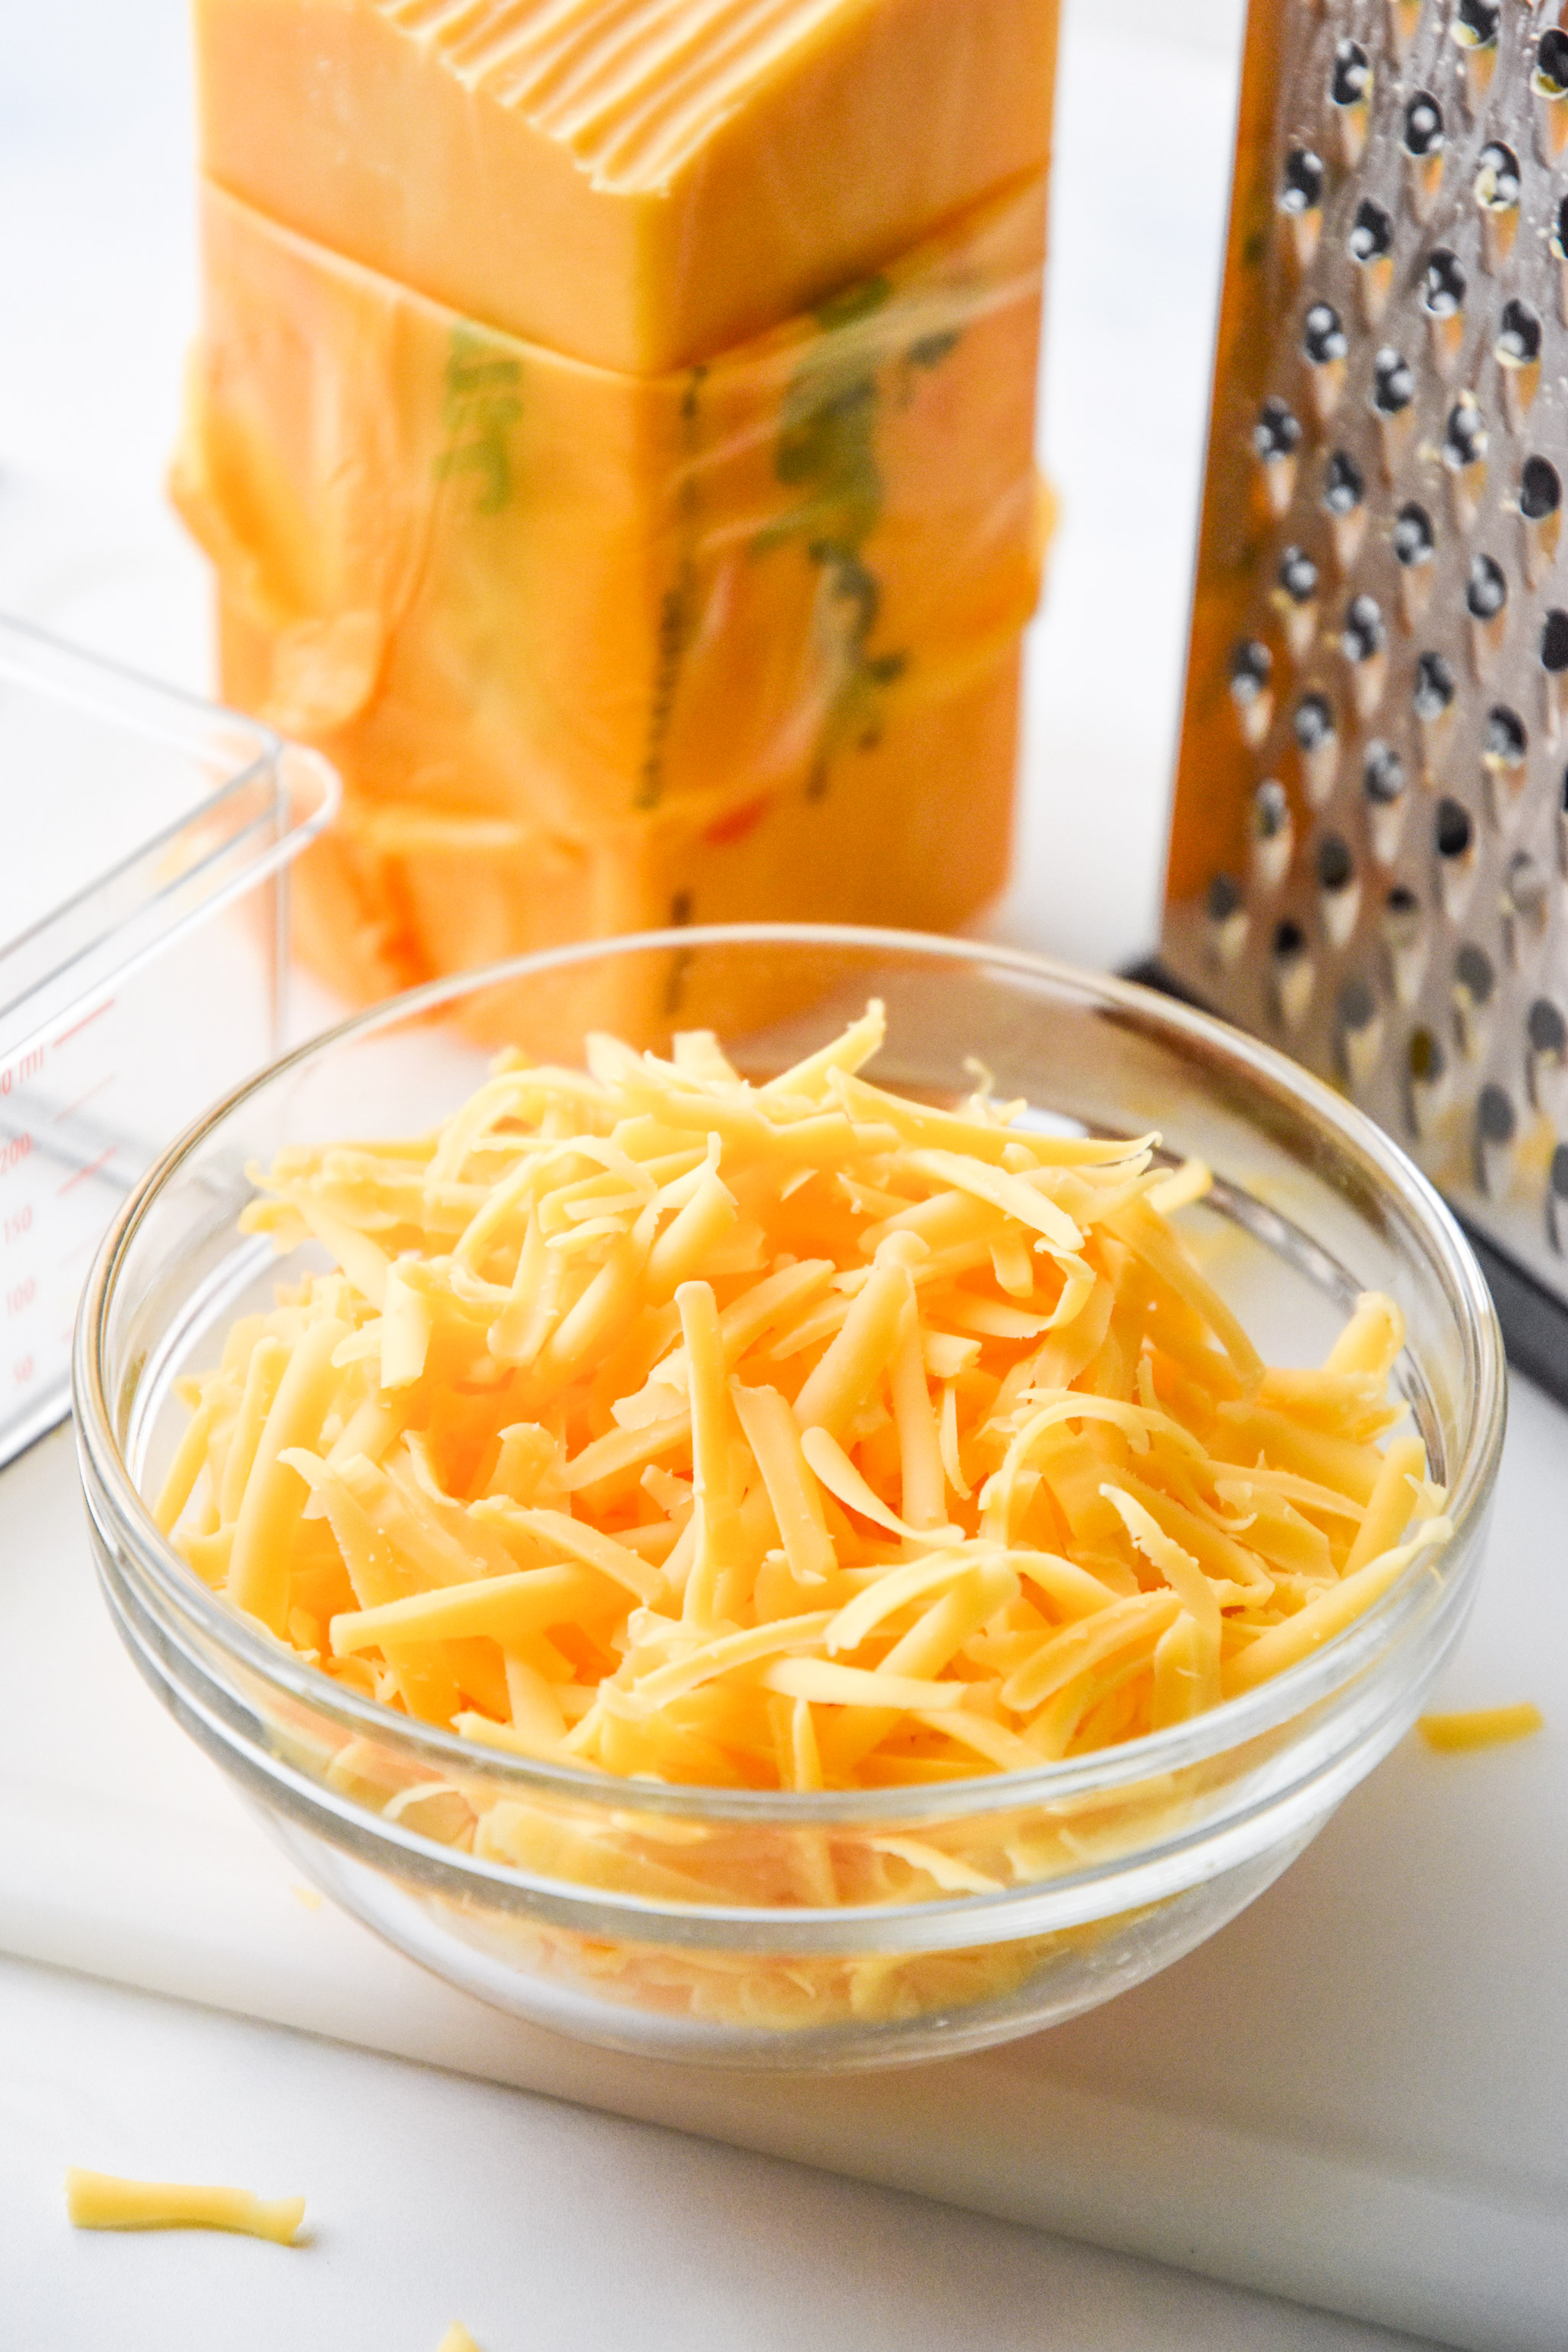 shredded cheese for the chili cheese dip